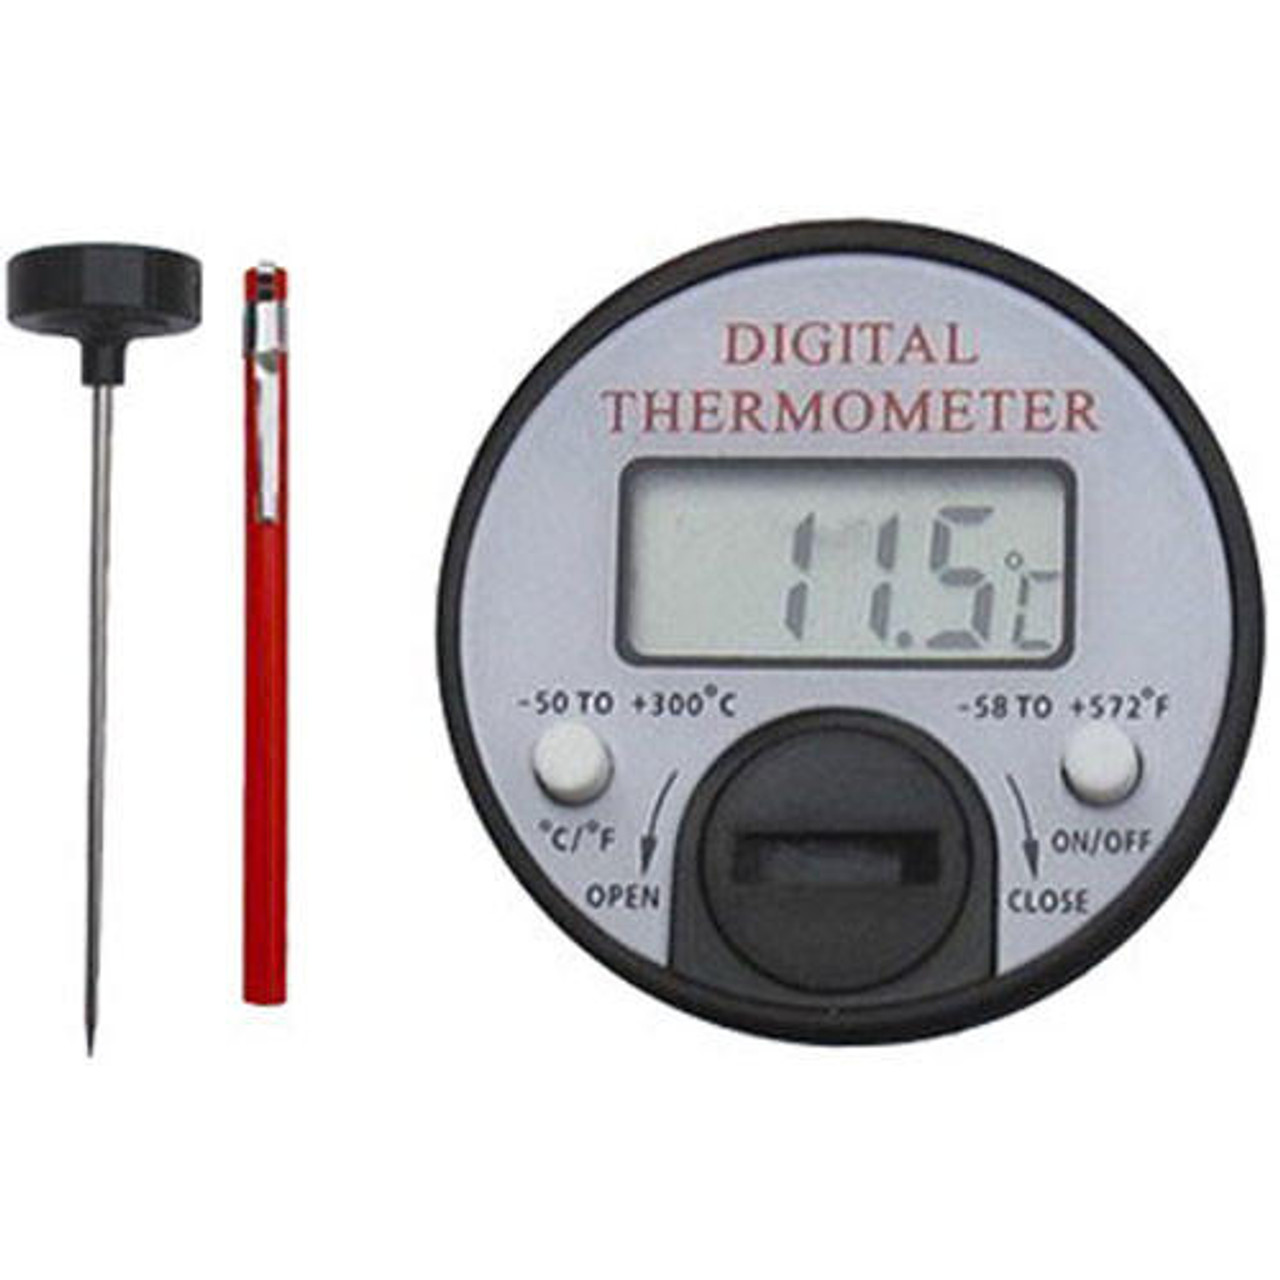 https://cdn11.bigcommerce.com/s-zgzol/images/stencil/1280x1280/products/12831/188825/thermatest-of-ohio-rt301s-soil-digital-pocket-thermometer-58-to-302f__43204.1684956101.jpg?c=2